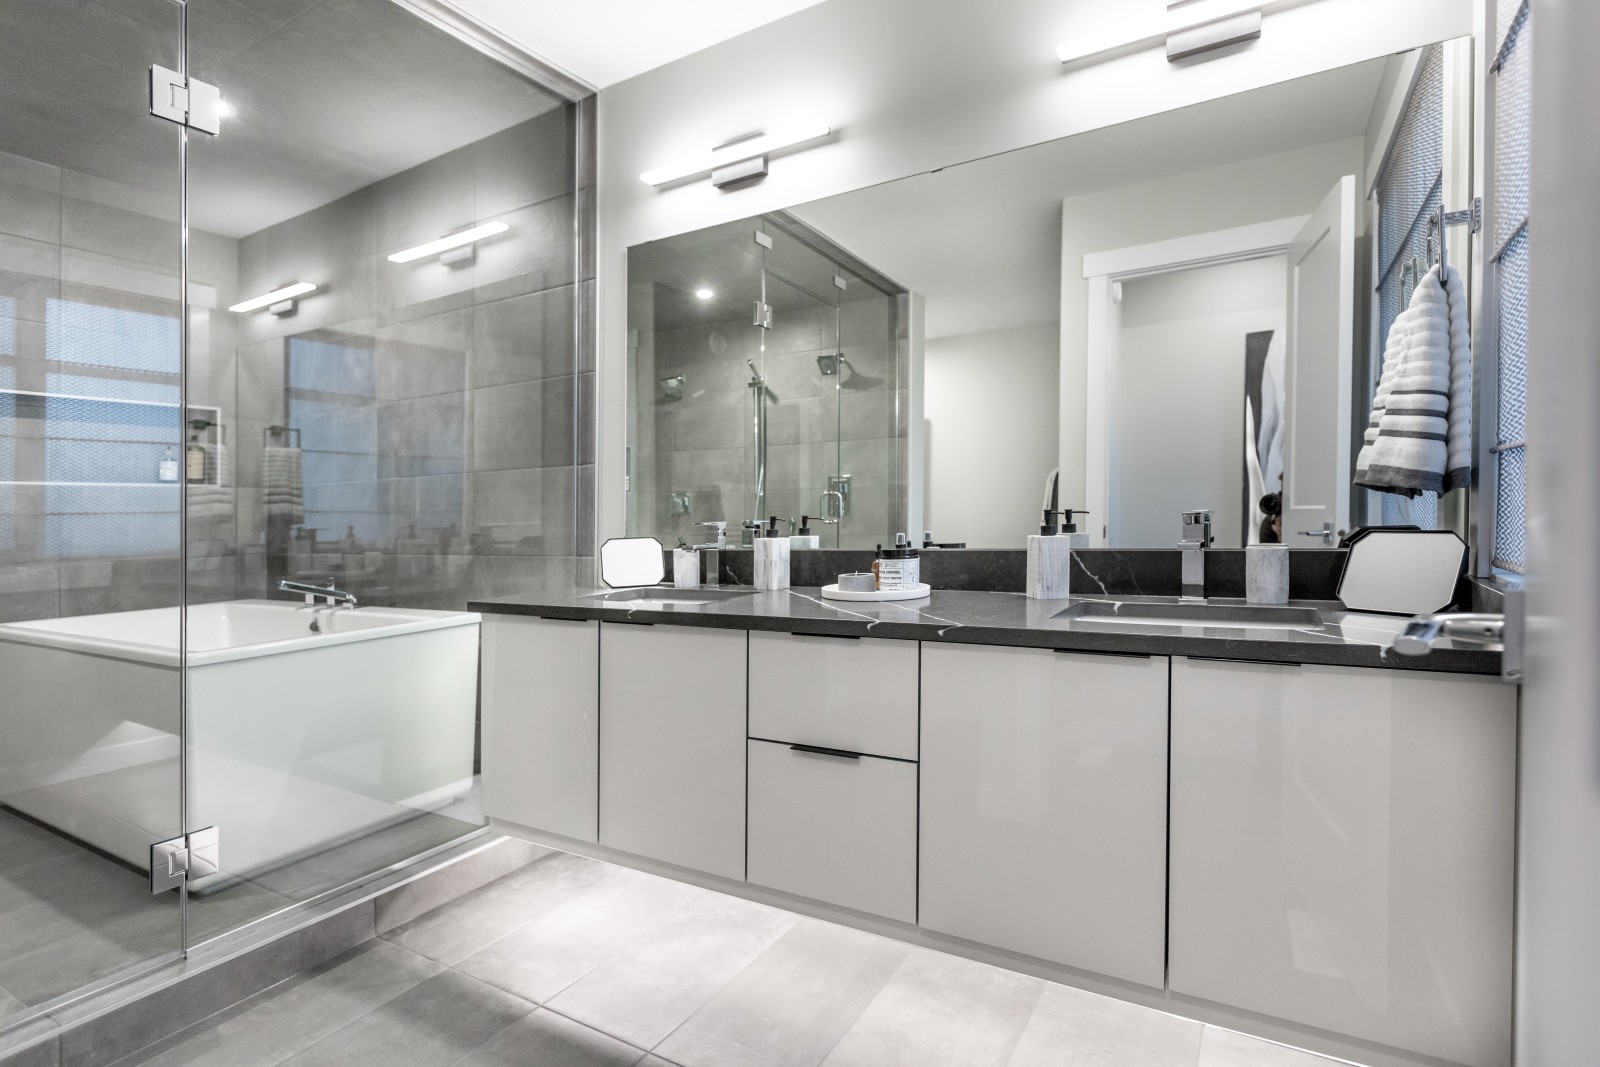 A floating vanity of grey acrylic cabinets with dark counter tops sits in front of the glass enclosed wet room